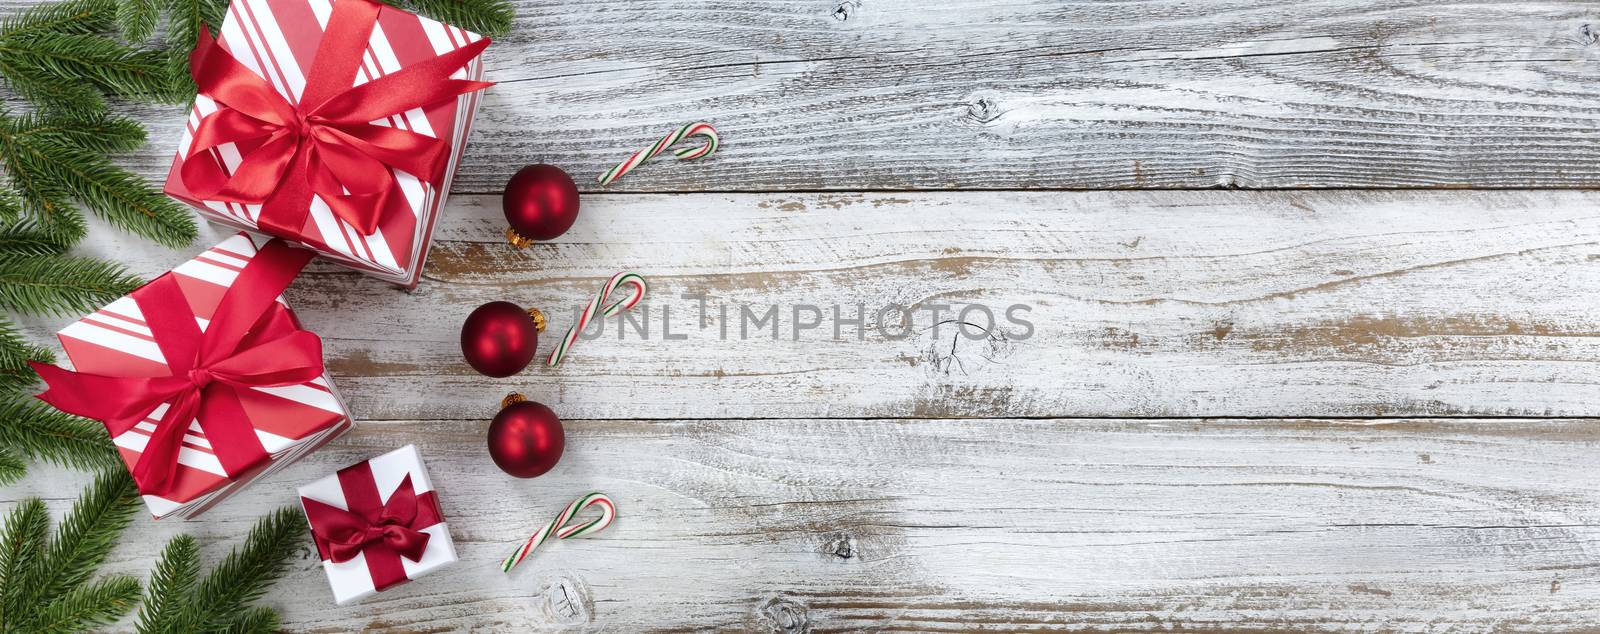 Merry Christmas holiday border on white weathered wooden backgro by tab1962